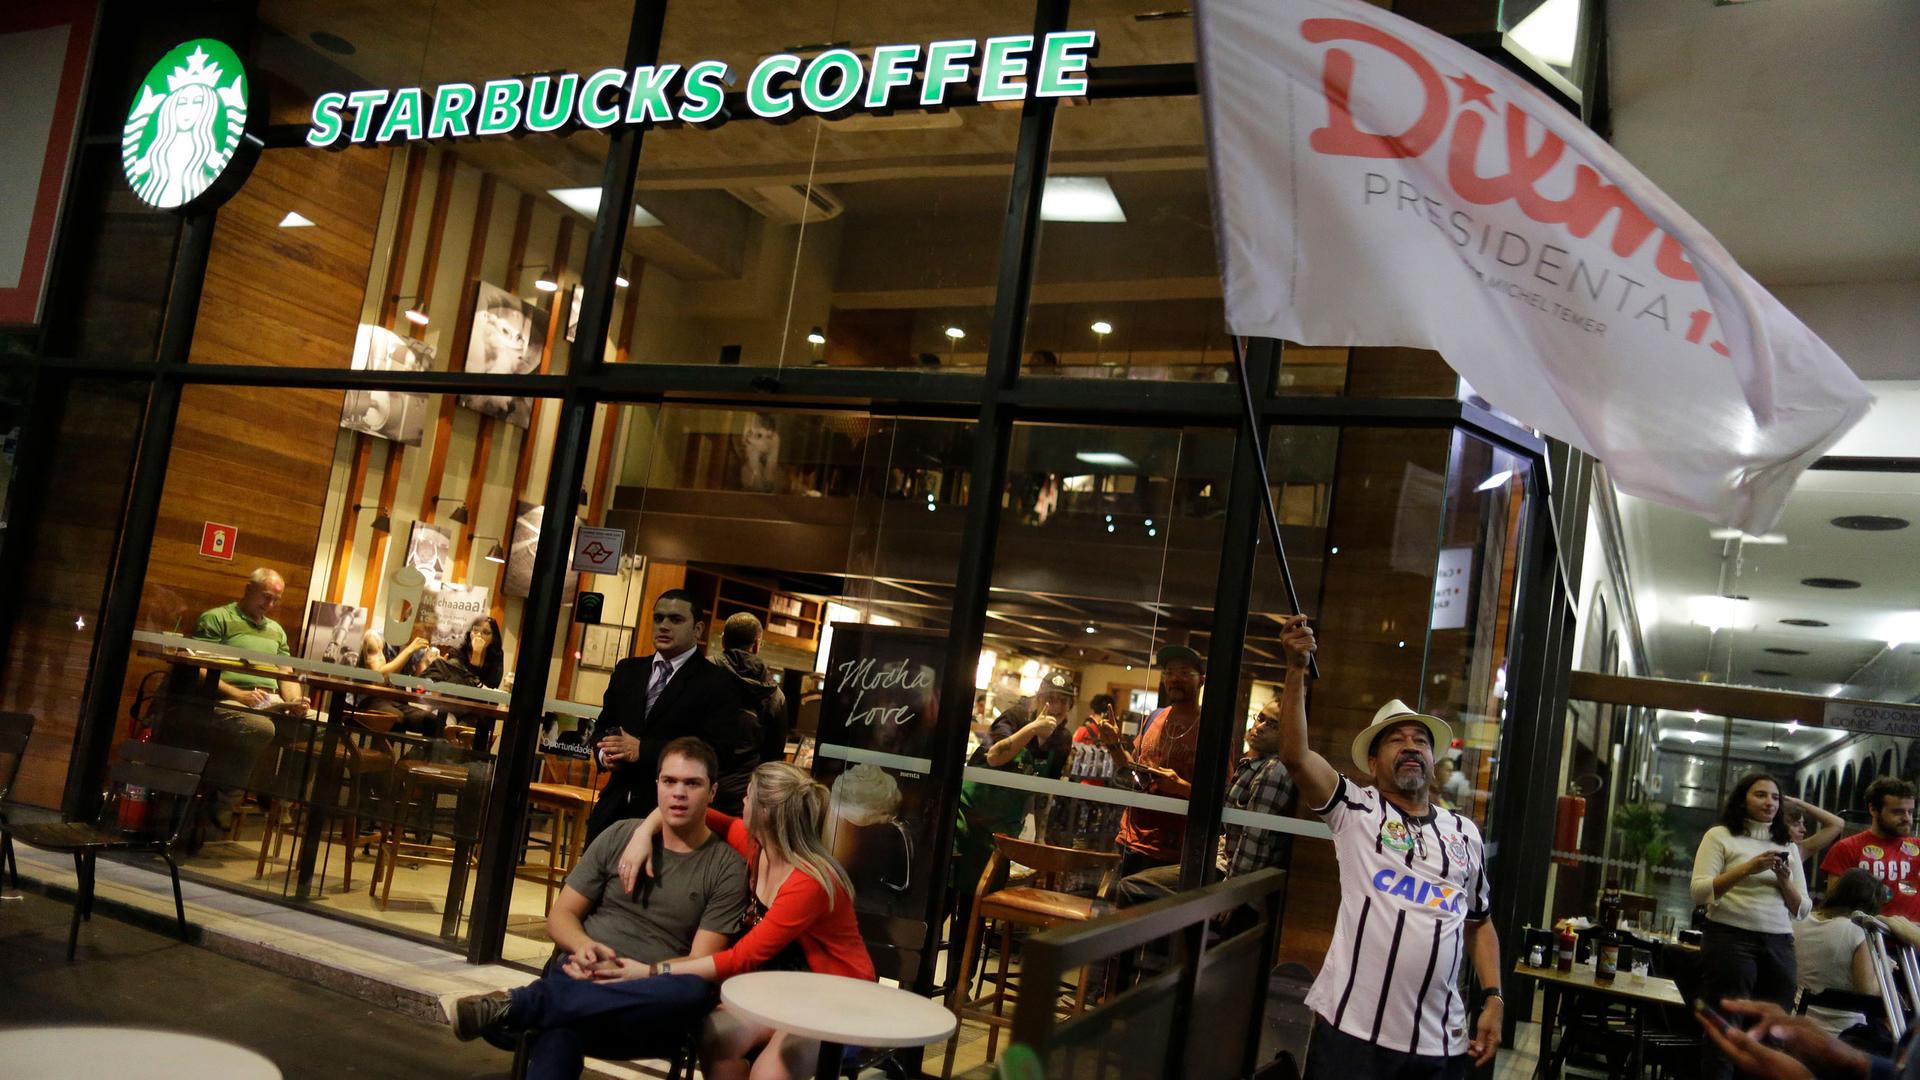 Brazilians gather in front of a Starbucks coffee shop in Sao Paulo, Brazil, Sunday, Oct. 26, 2014. Recent extreme weather events have taken a toll on Brazil's coffee crops, straining the global coffee supply chain. 